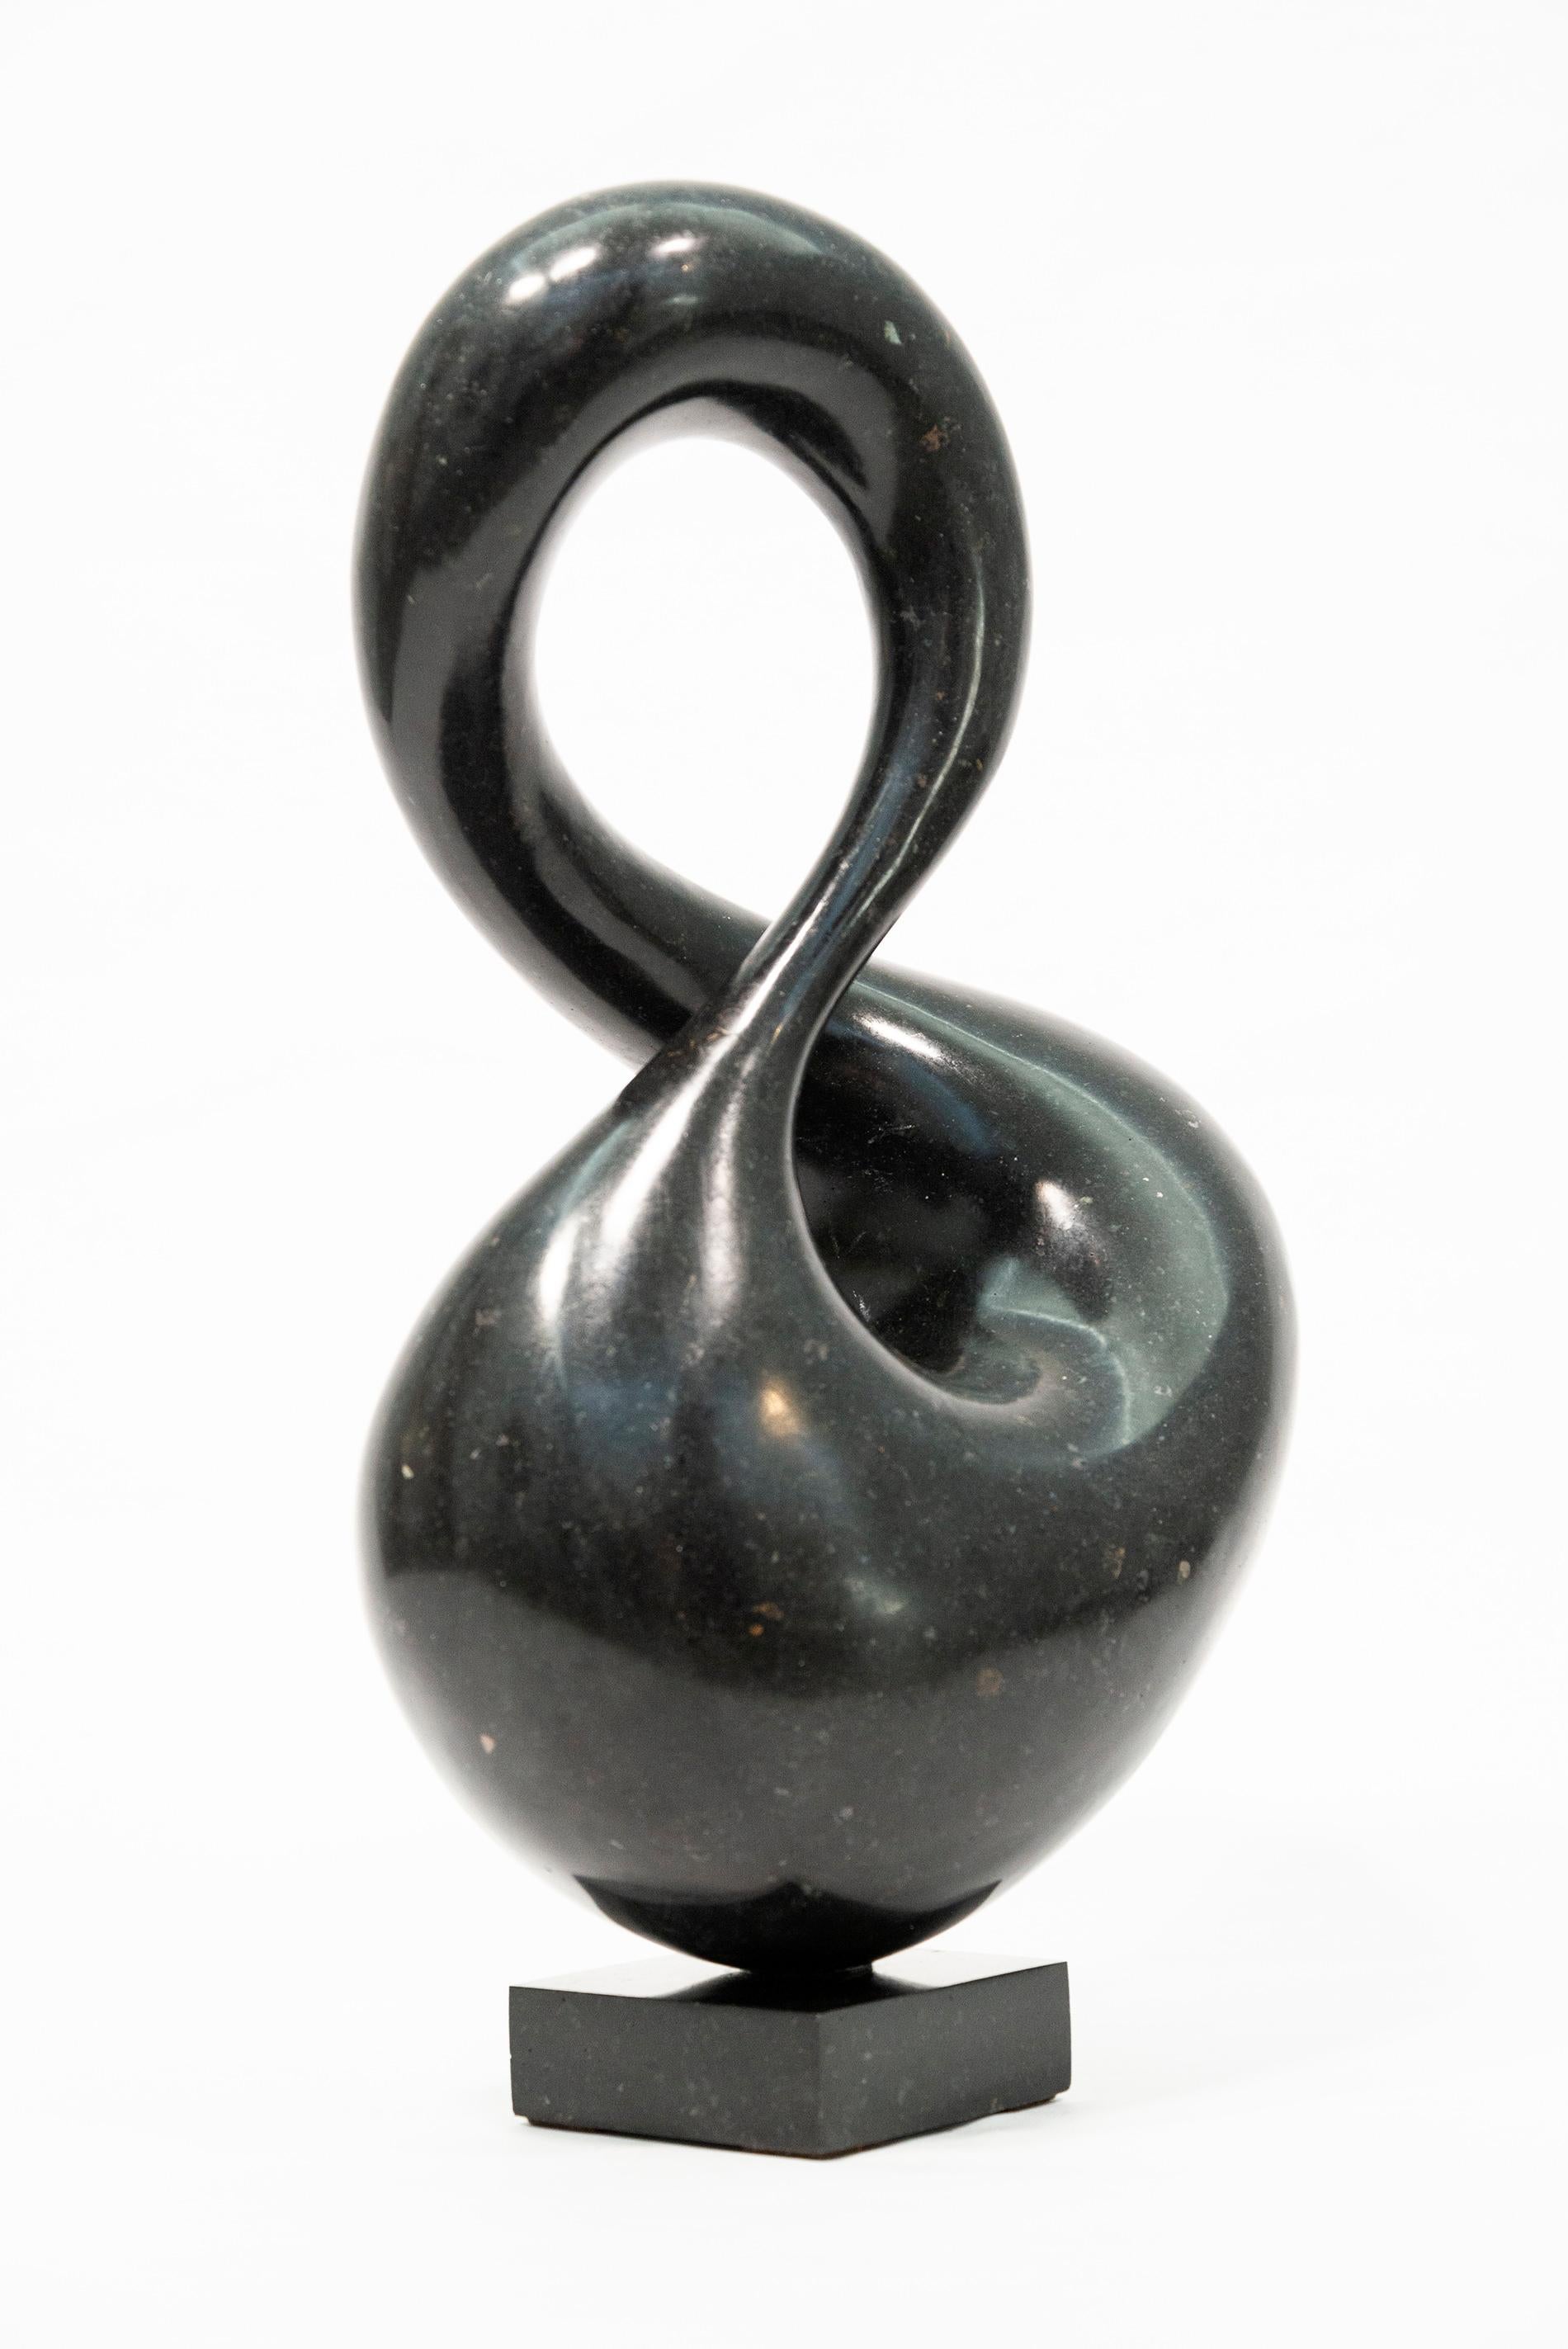 Event 3/50 - dark, smooth, polished, abstract, black granite sculpture - Sculpture by Jeremy Guy